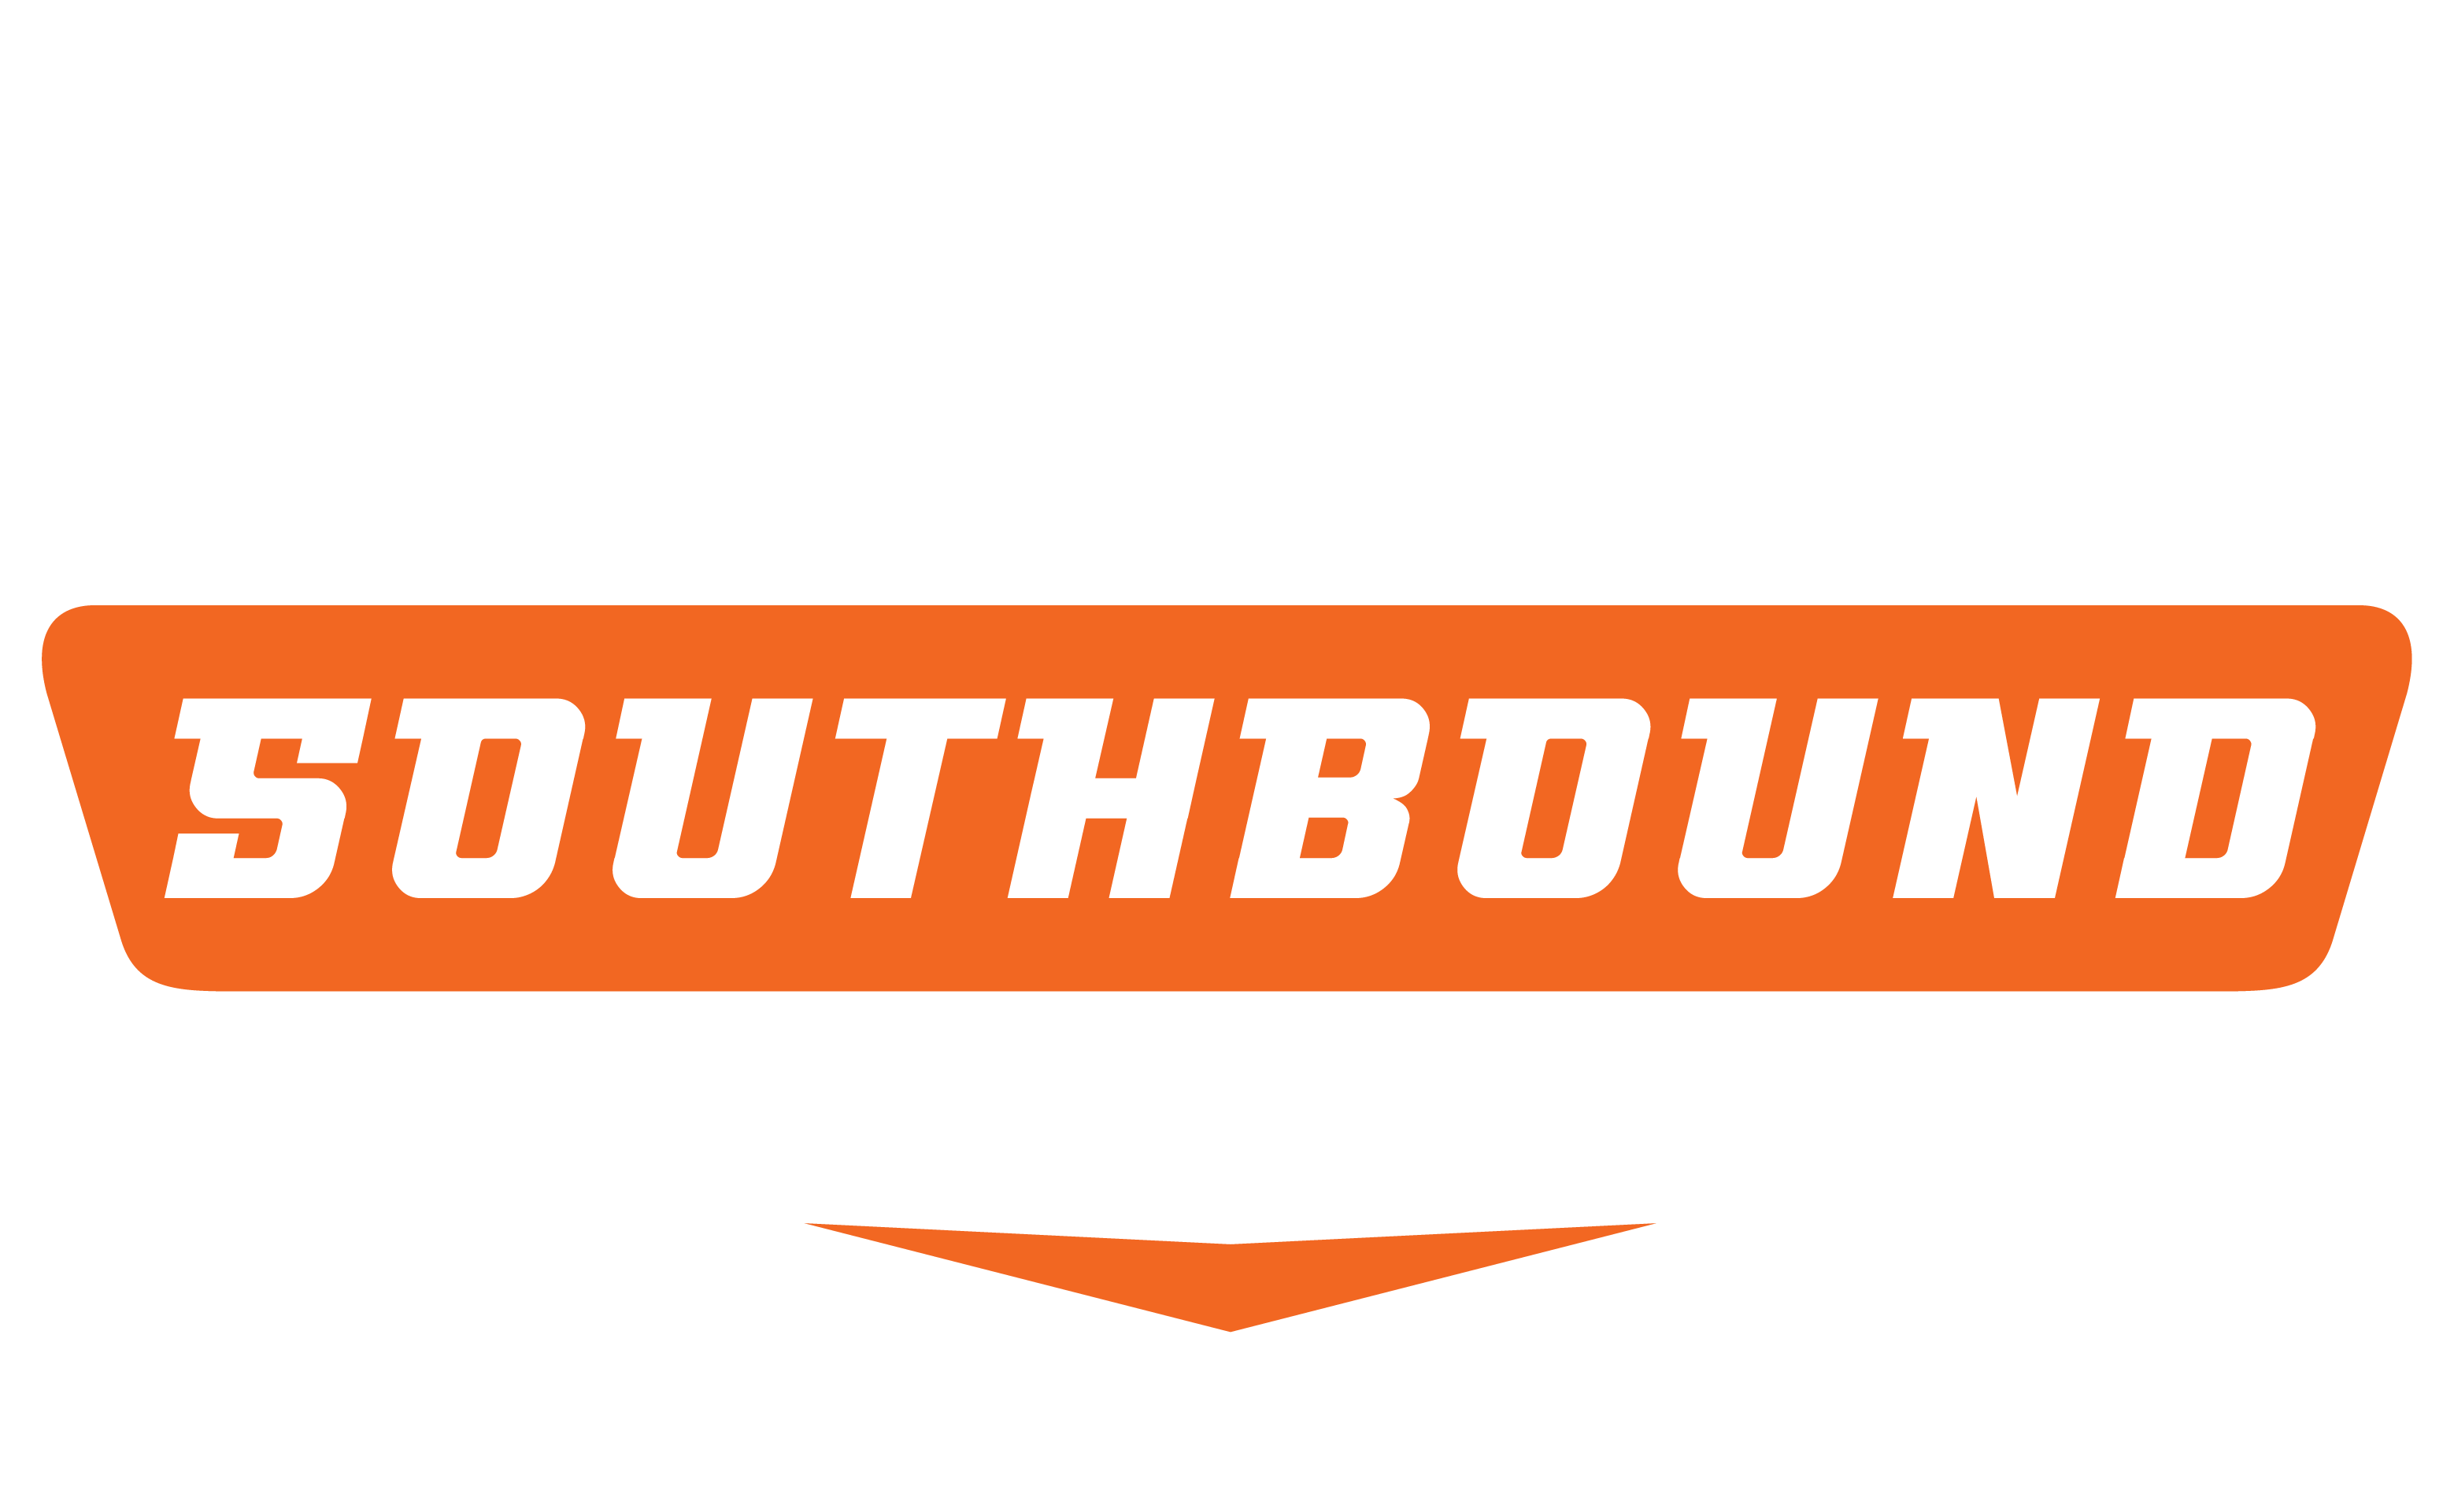 Southbound Powersports proudly serves Shelbyville, TN and our neighbors in Shelbyville, TN, Murfreesboro, TN, Tullahoma, TN, Fayetteville, TN, Winchester, TN